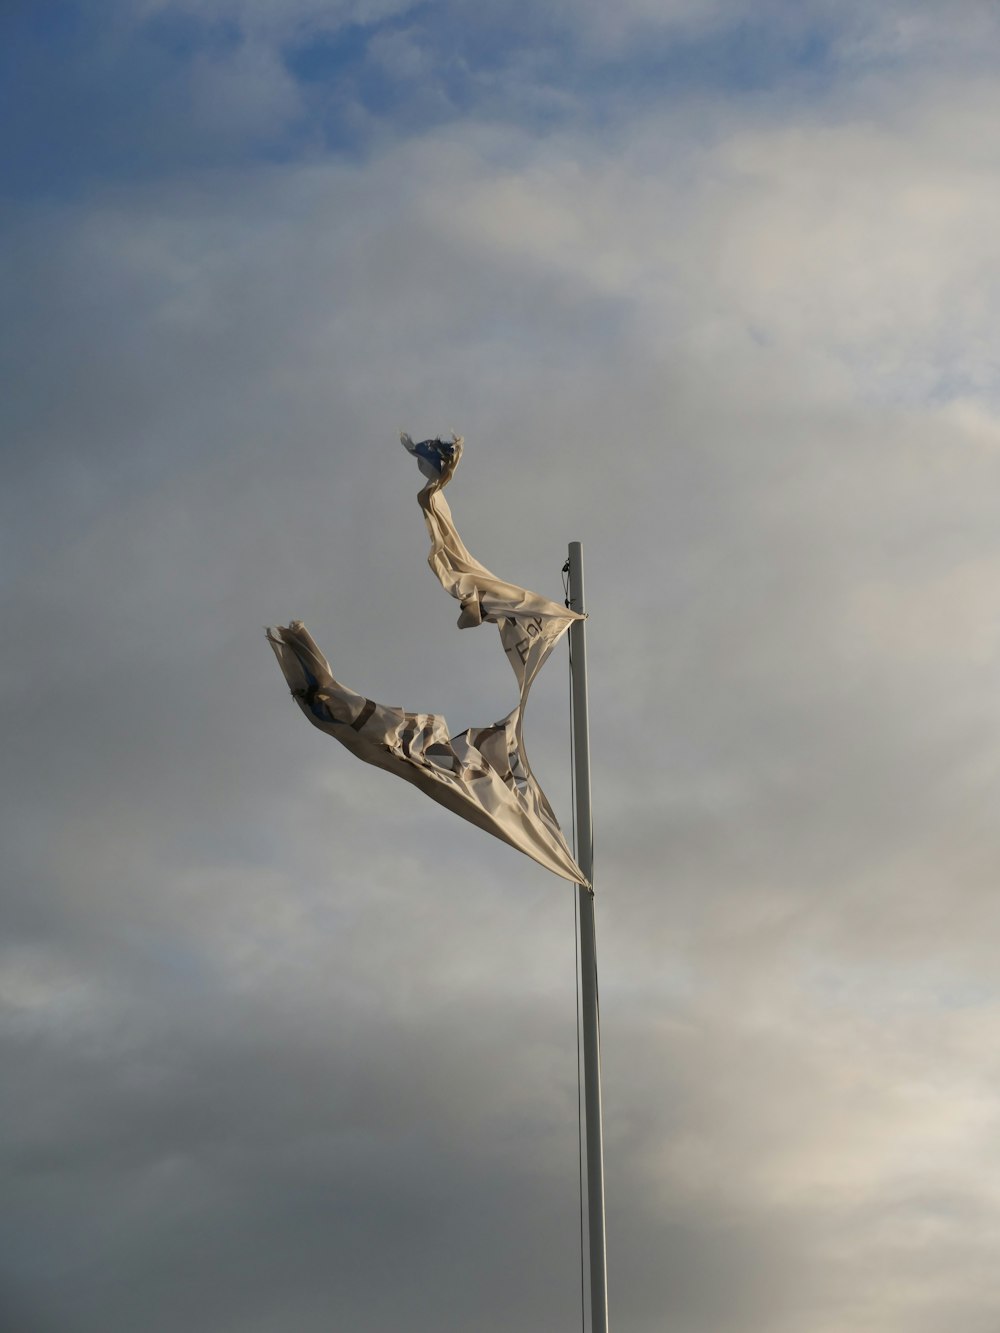 two giraffes on a pole with a cloudy sky in the background